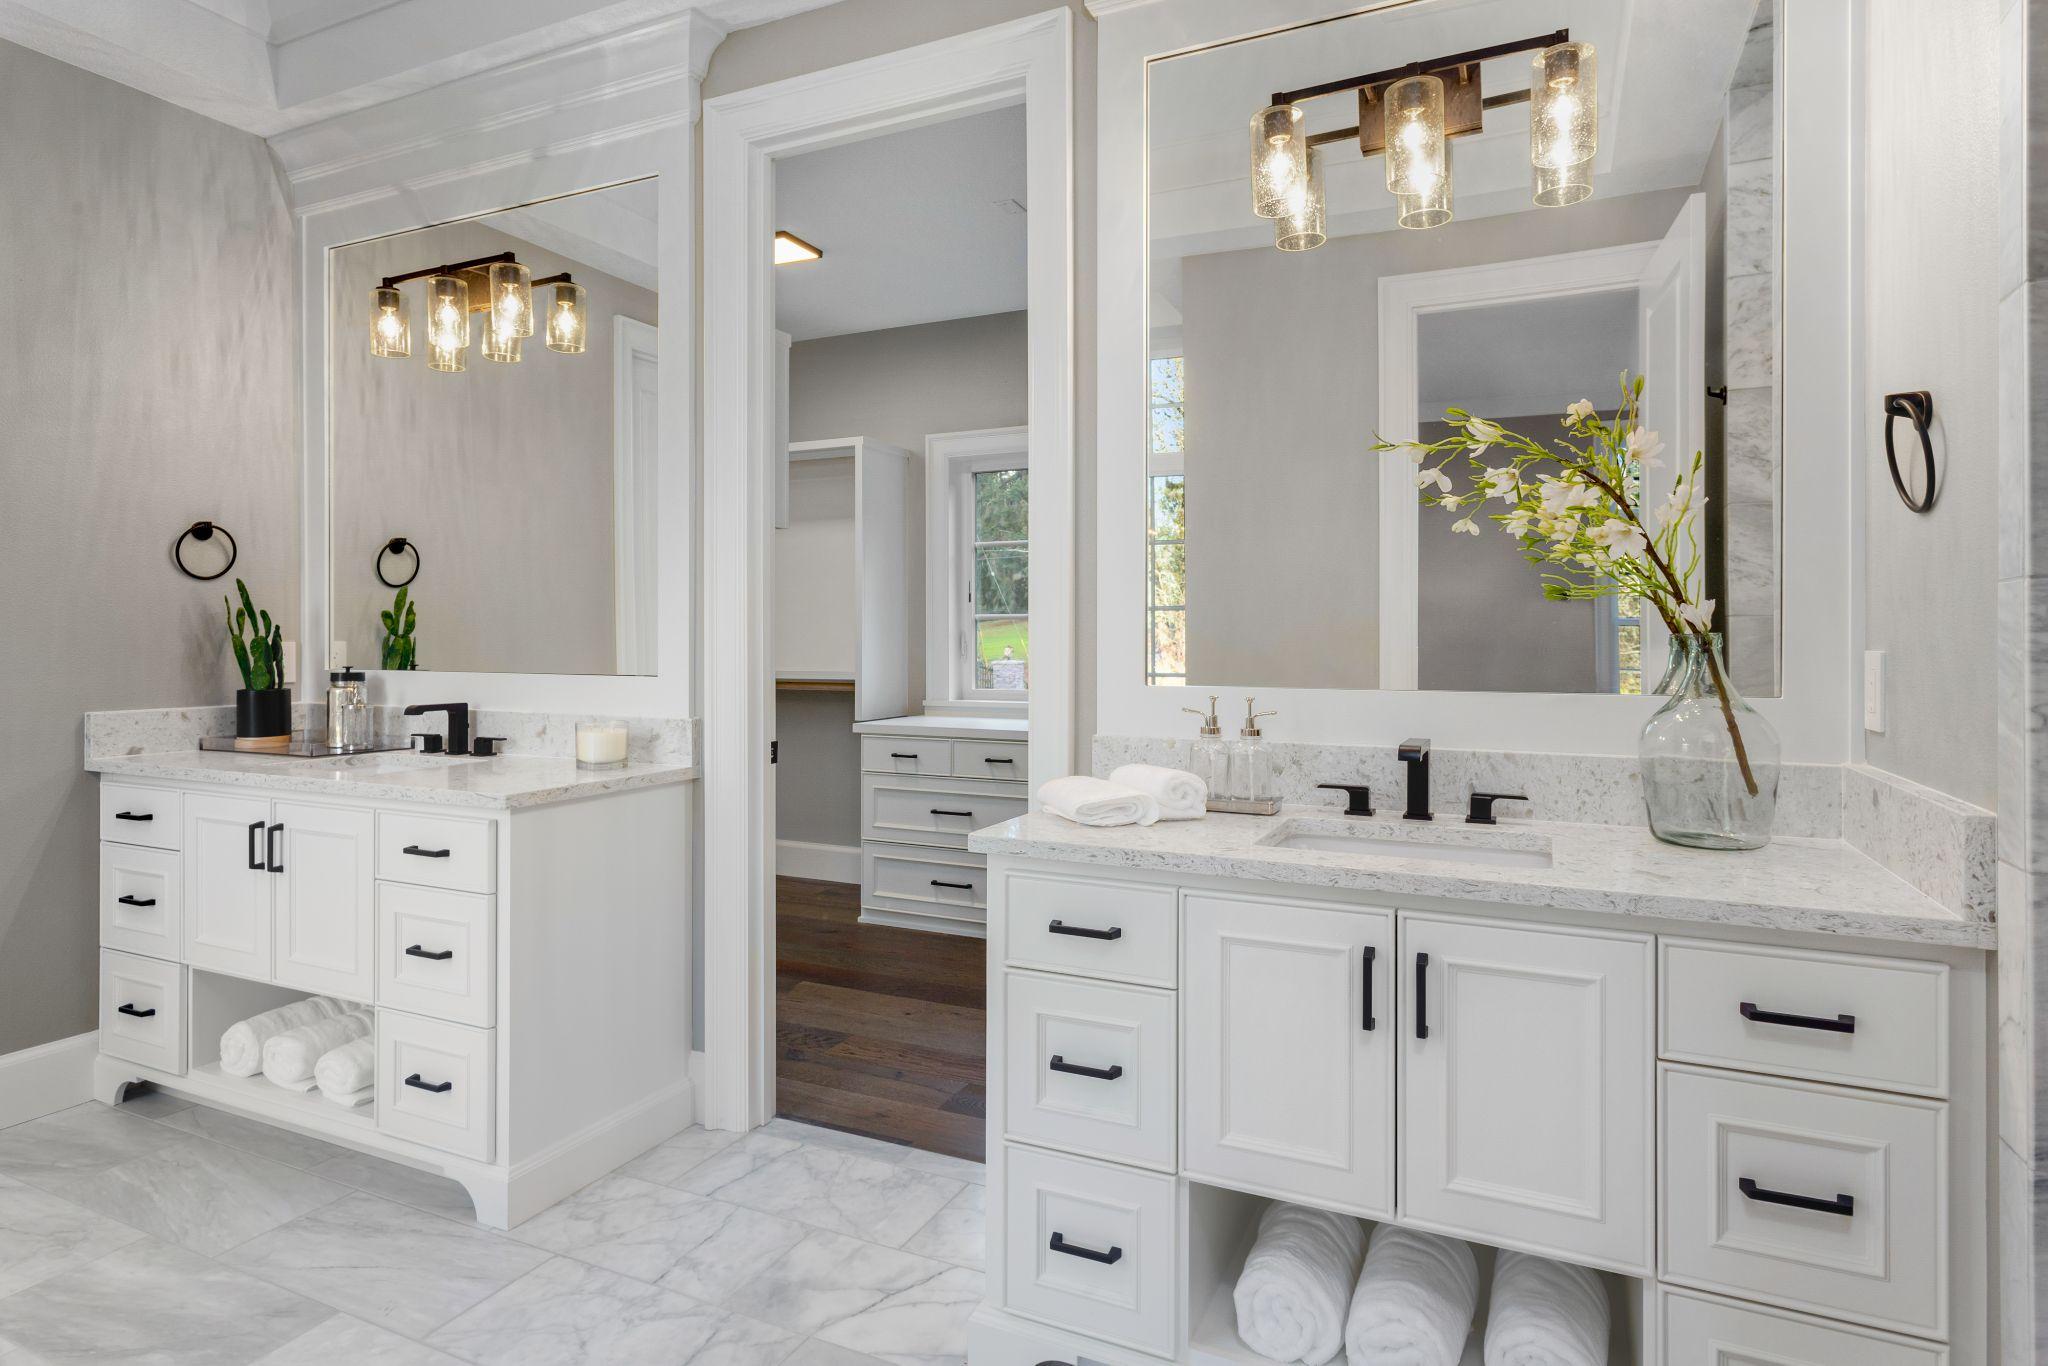 https://americanbathind.com/wp-content/uploads/2023/05/beautiful-bathroom-interior-with-vanity-mirror-and-cabinets.jpg